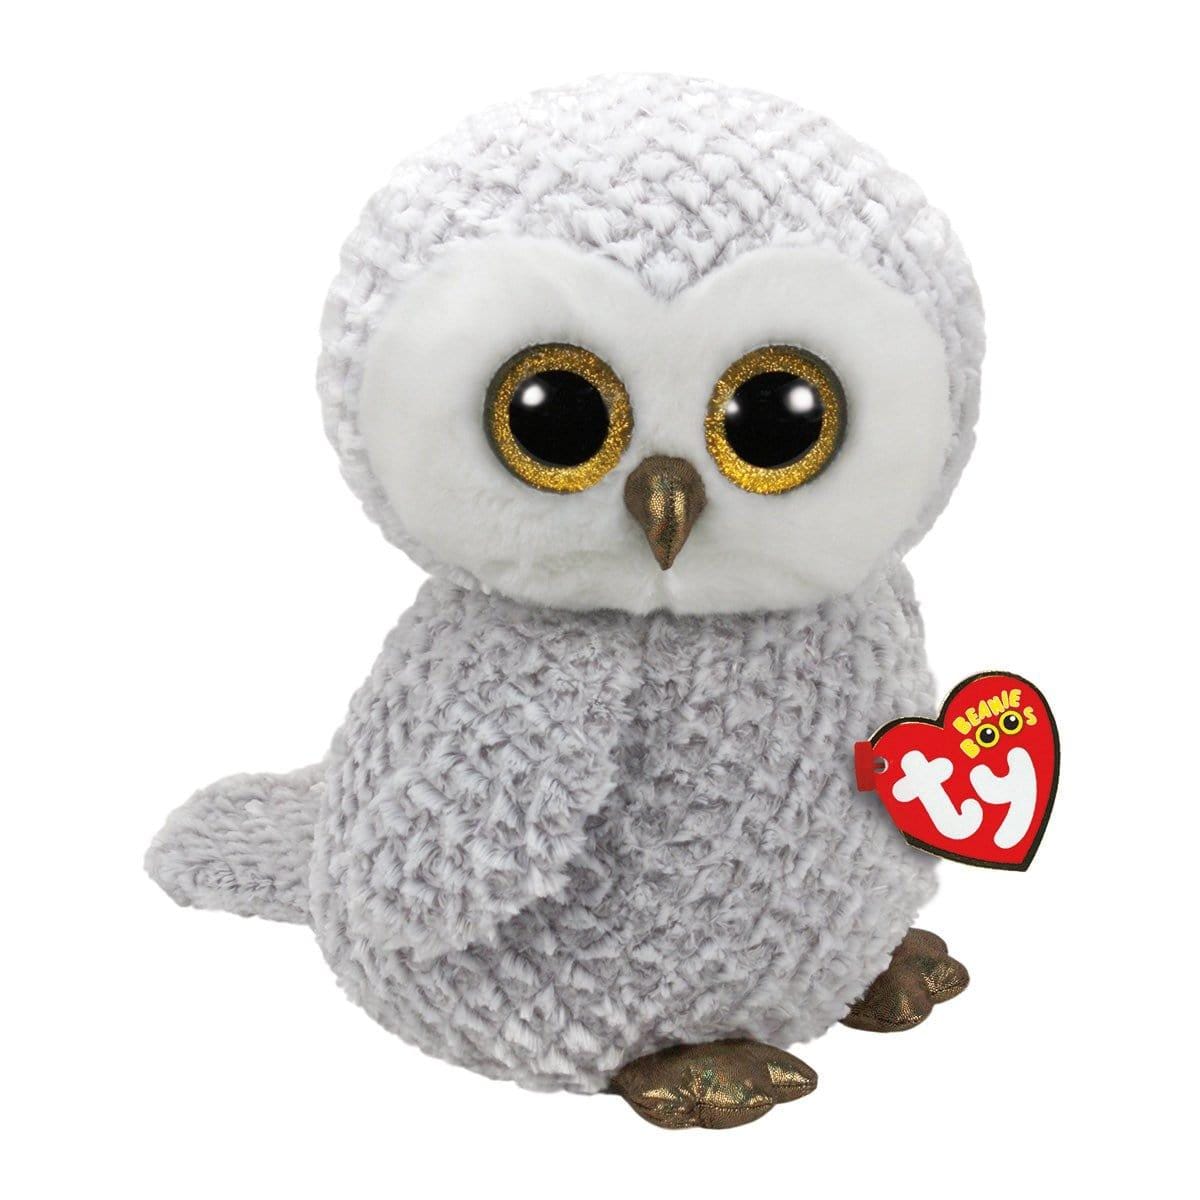 Buy Plushes Beanie Boo Large - Owlette sold at Party Expert